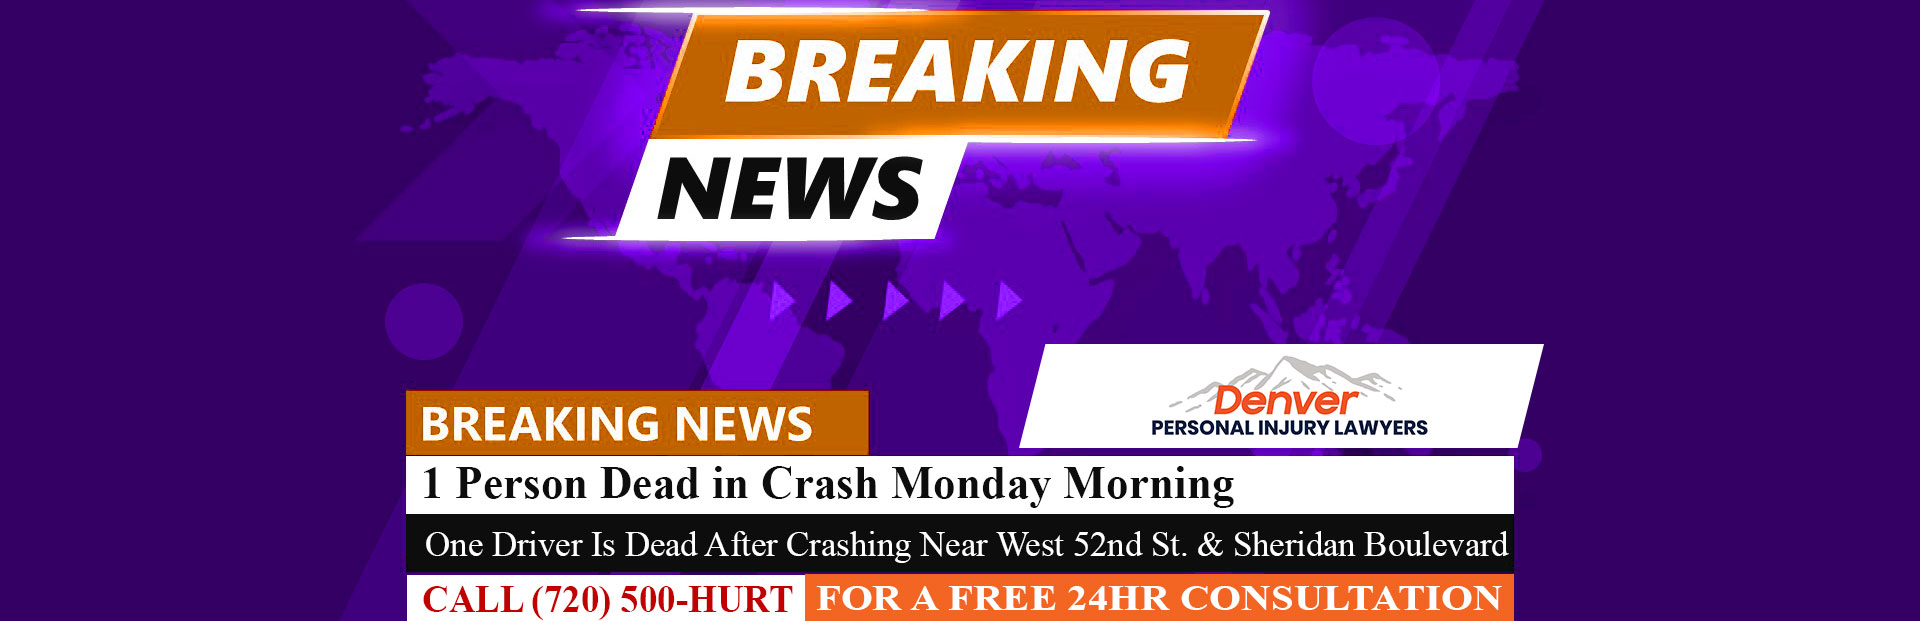 [06-06-23] 1 Person Dead in Crash Monday Morning; 5 Injured in a Separate Wreck